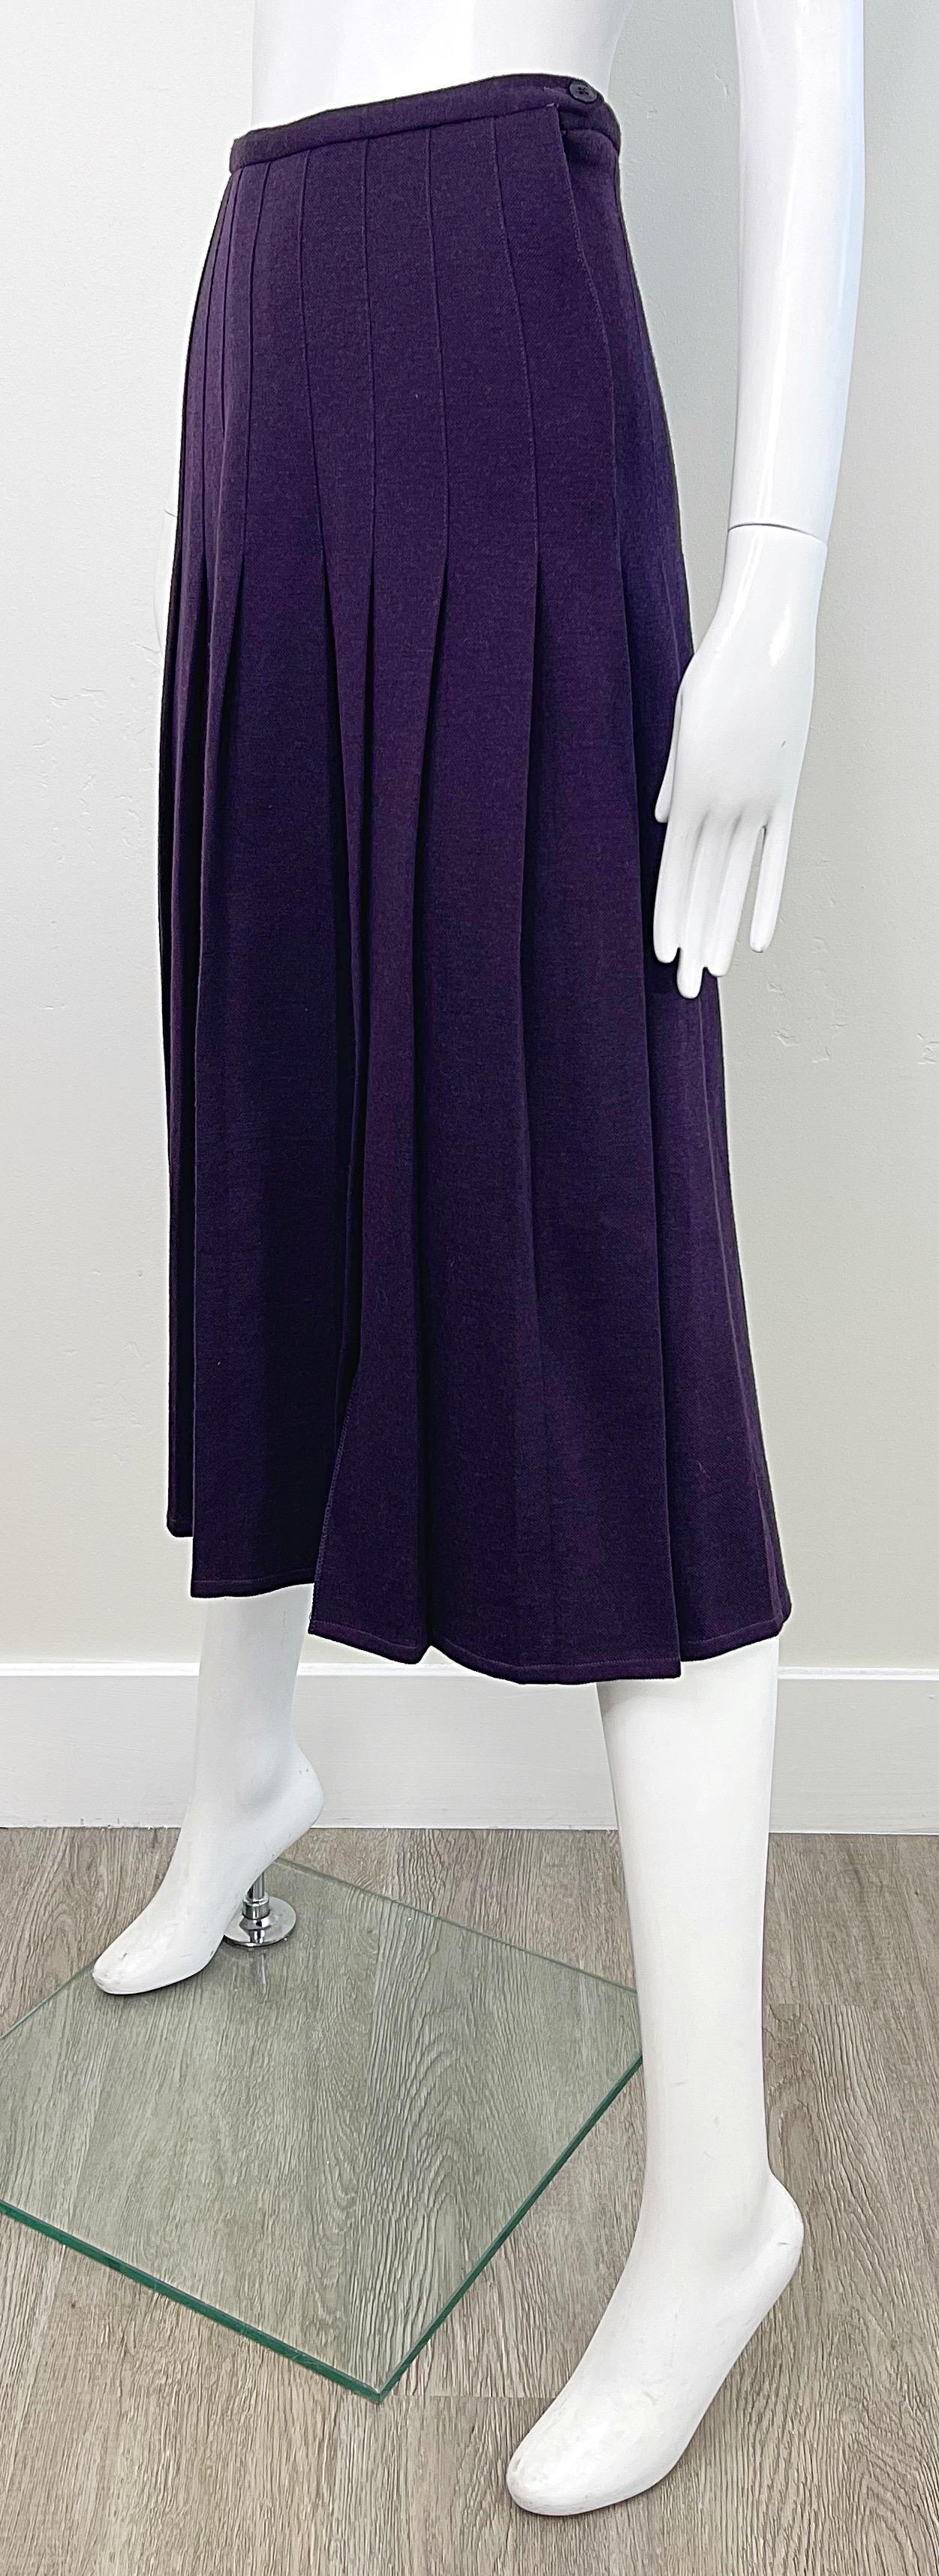 1970s Sonia Rykiel Purple Eggplant Vintage 70s Pleated Wool Midi Skirt In Excellent Condition For Sale In San Diego, CA